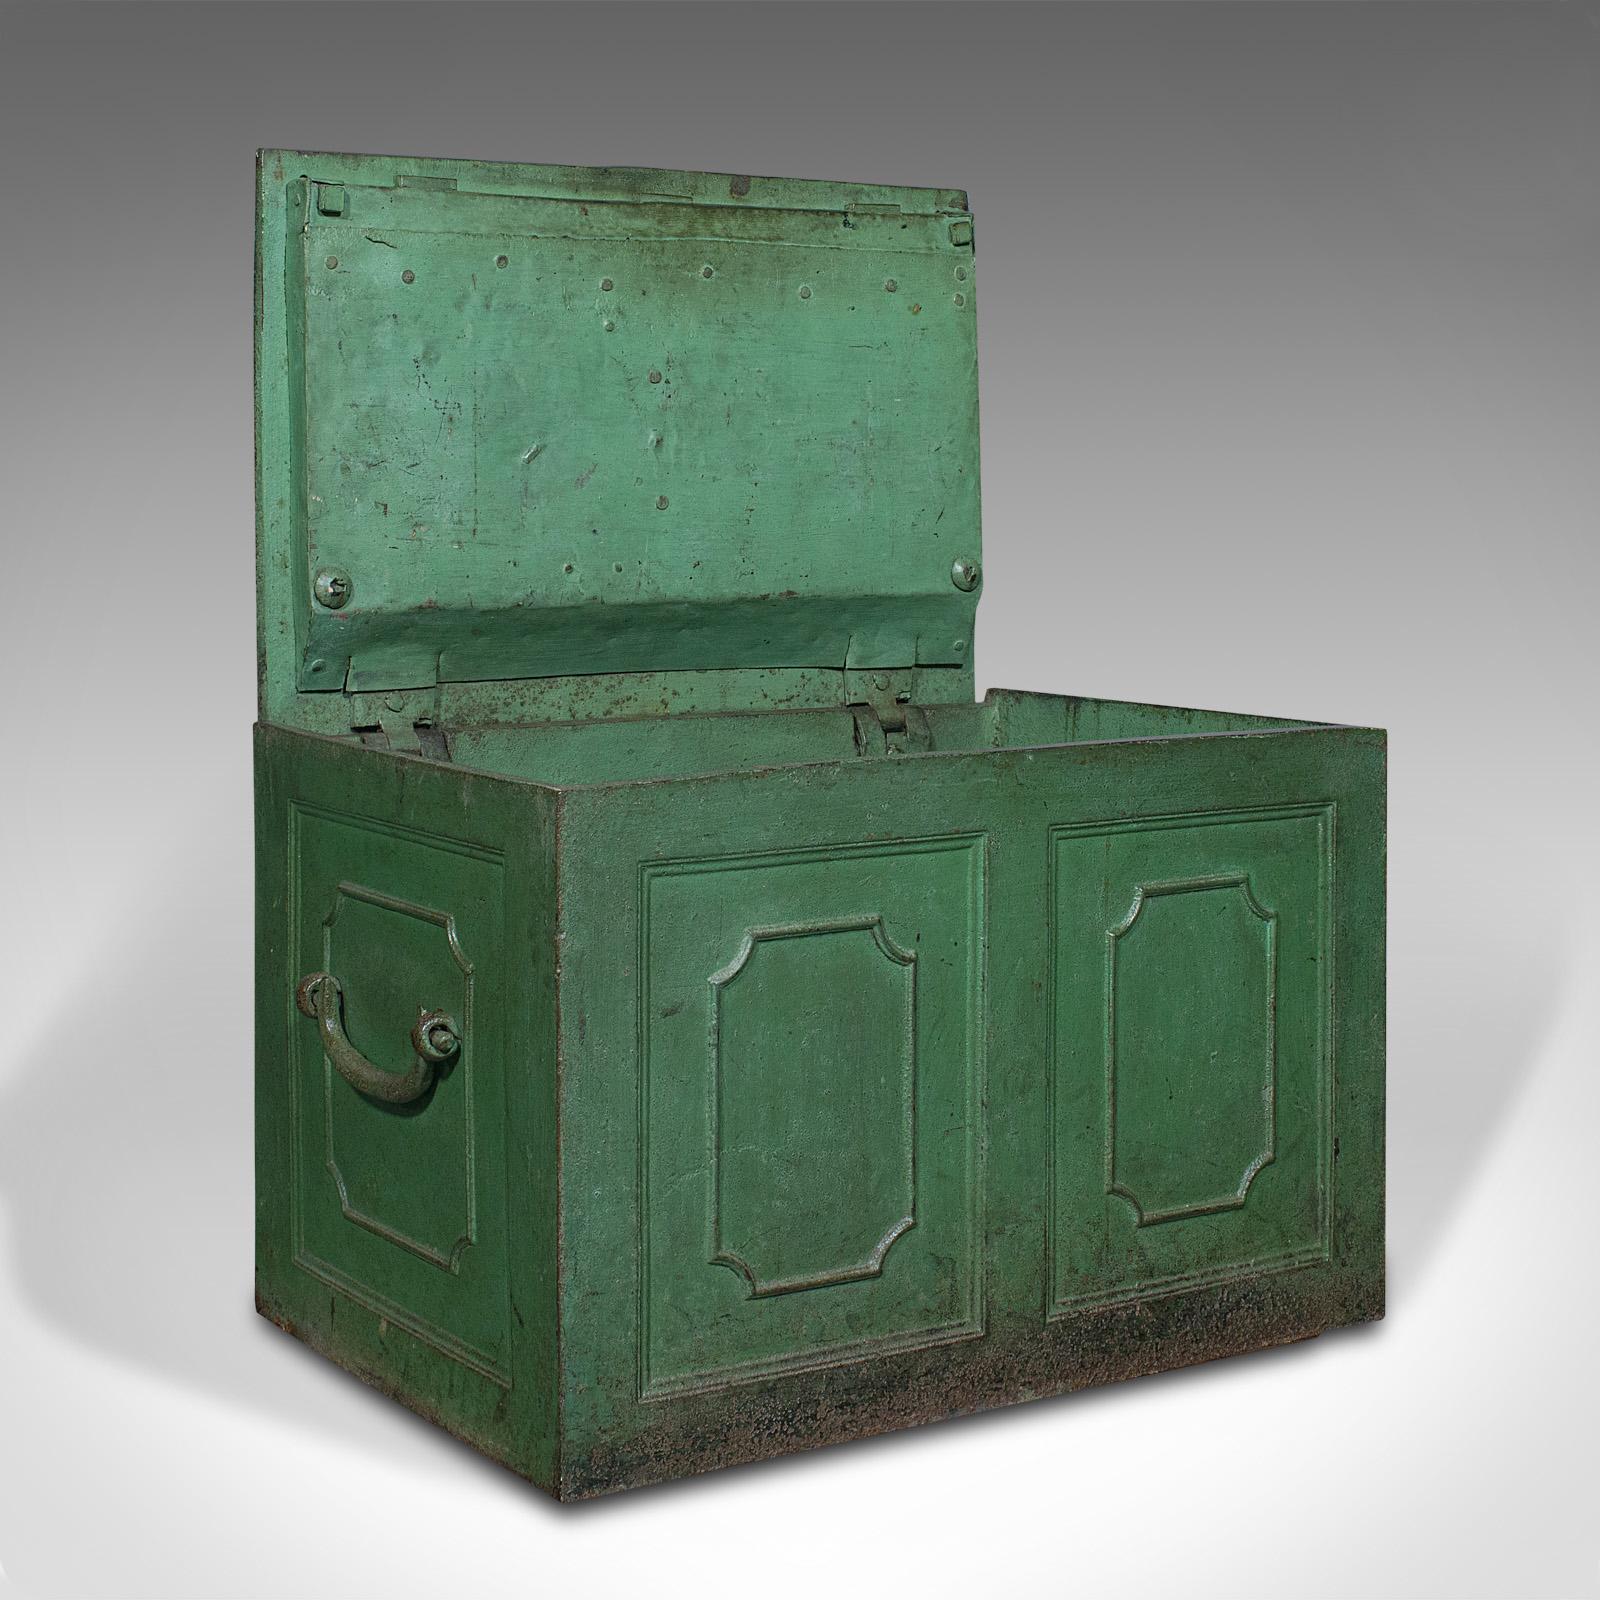 This is a heavy antique merchant's strongbox. An English, cast iron safe deposit case, dating to the Georgian period, circa 1800.

Superb antique vault of impressive weight 
Displays a desirable aged patina throughout
Cast iron resplendent in a